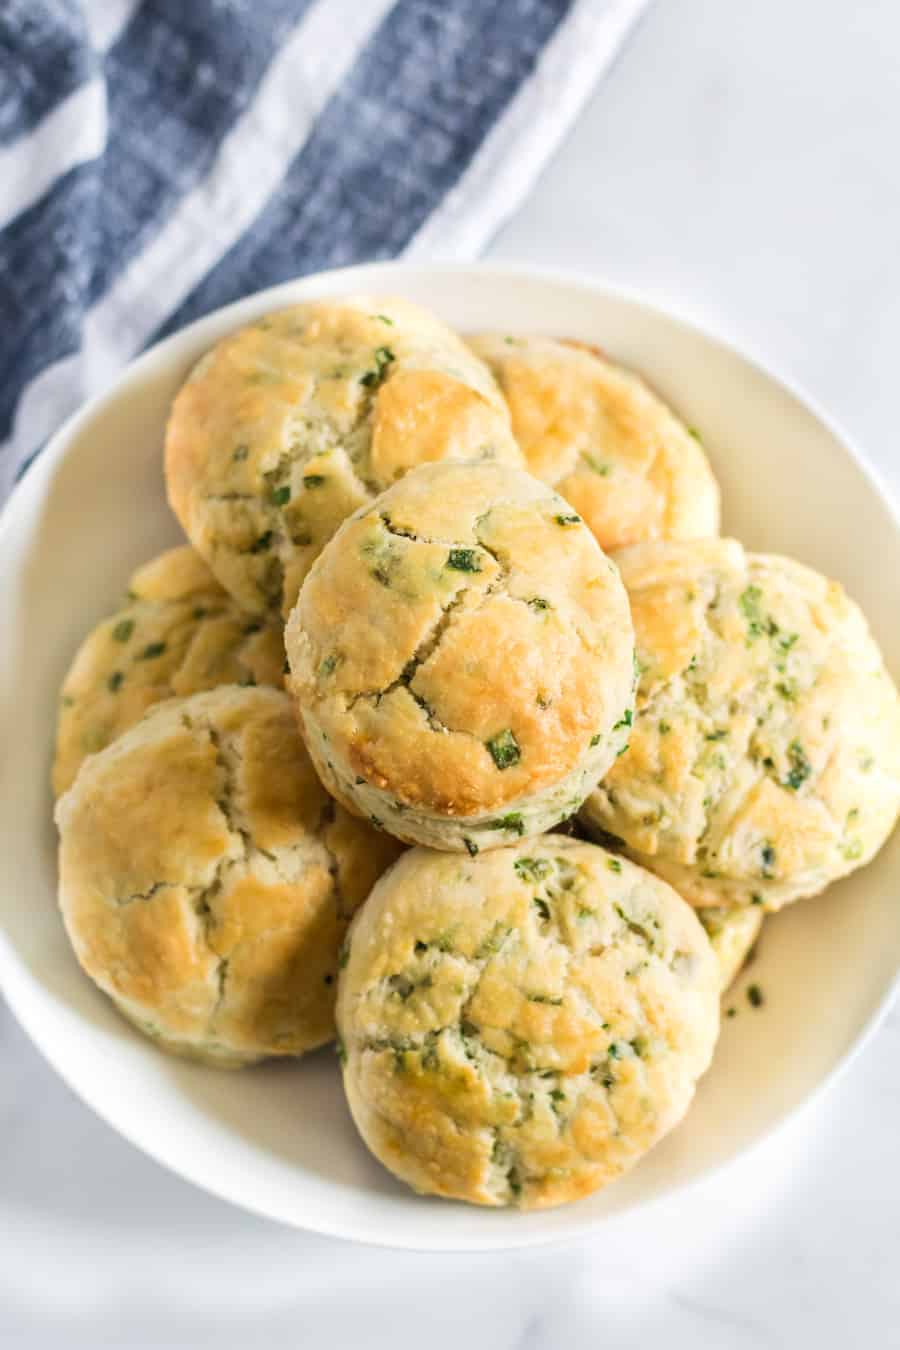 Buttery and flakey, Homemade Chive Biscuits melt in your mouth and have a just-perfect, subtle oniony taste that goes great with any meal of the day.